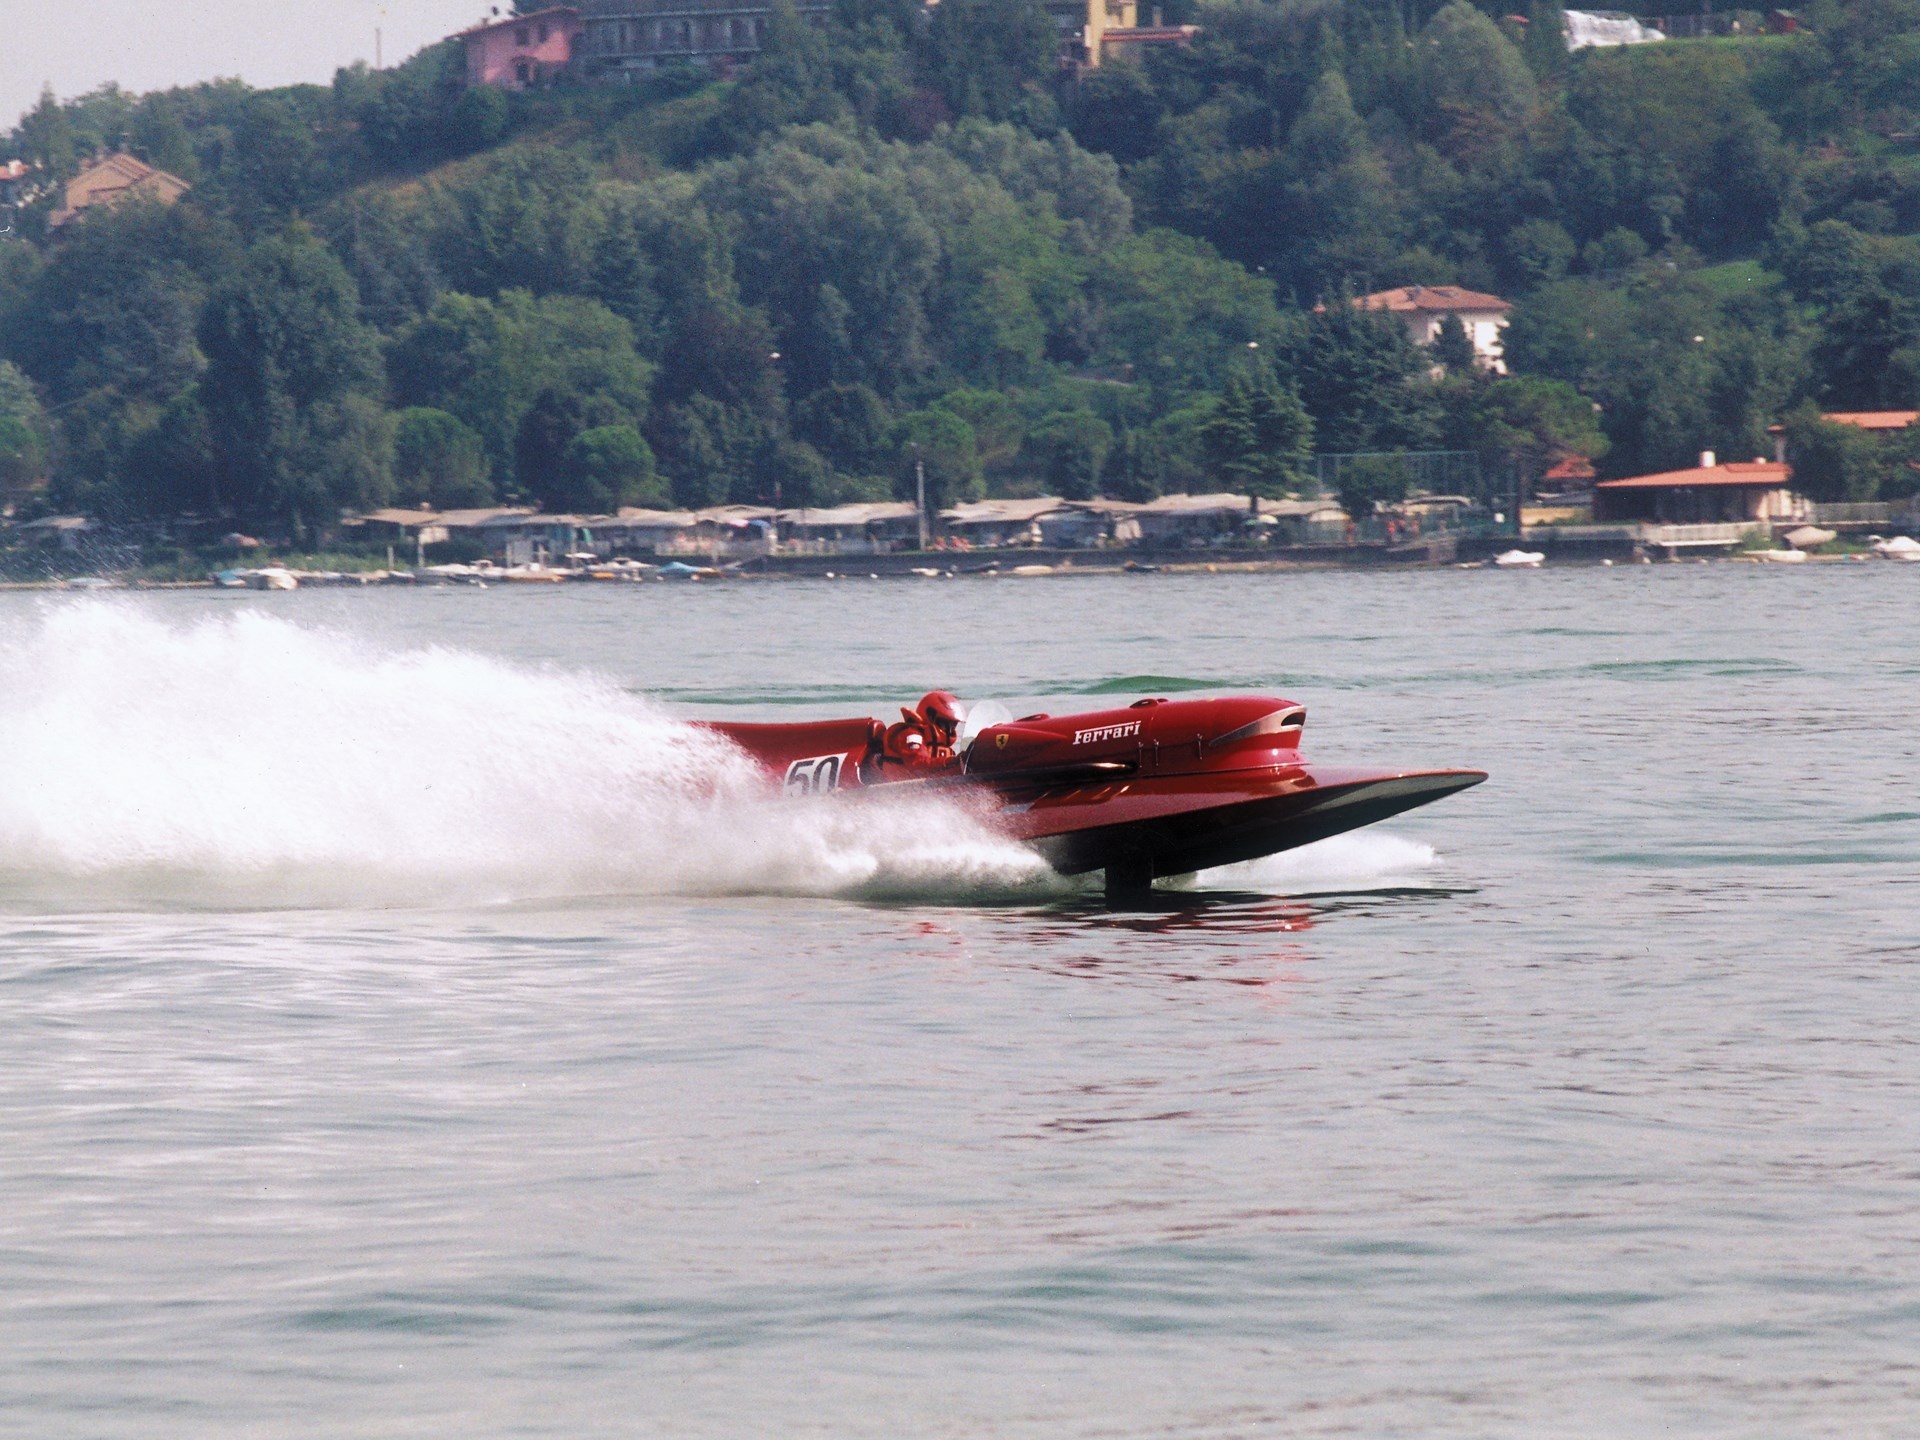 Hydroplane: 1953 Timossi-Ferrari 'Arno XI' racing motorboat equipped with hydrofoils. 1920x1440 HD Wallpaper.